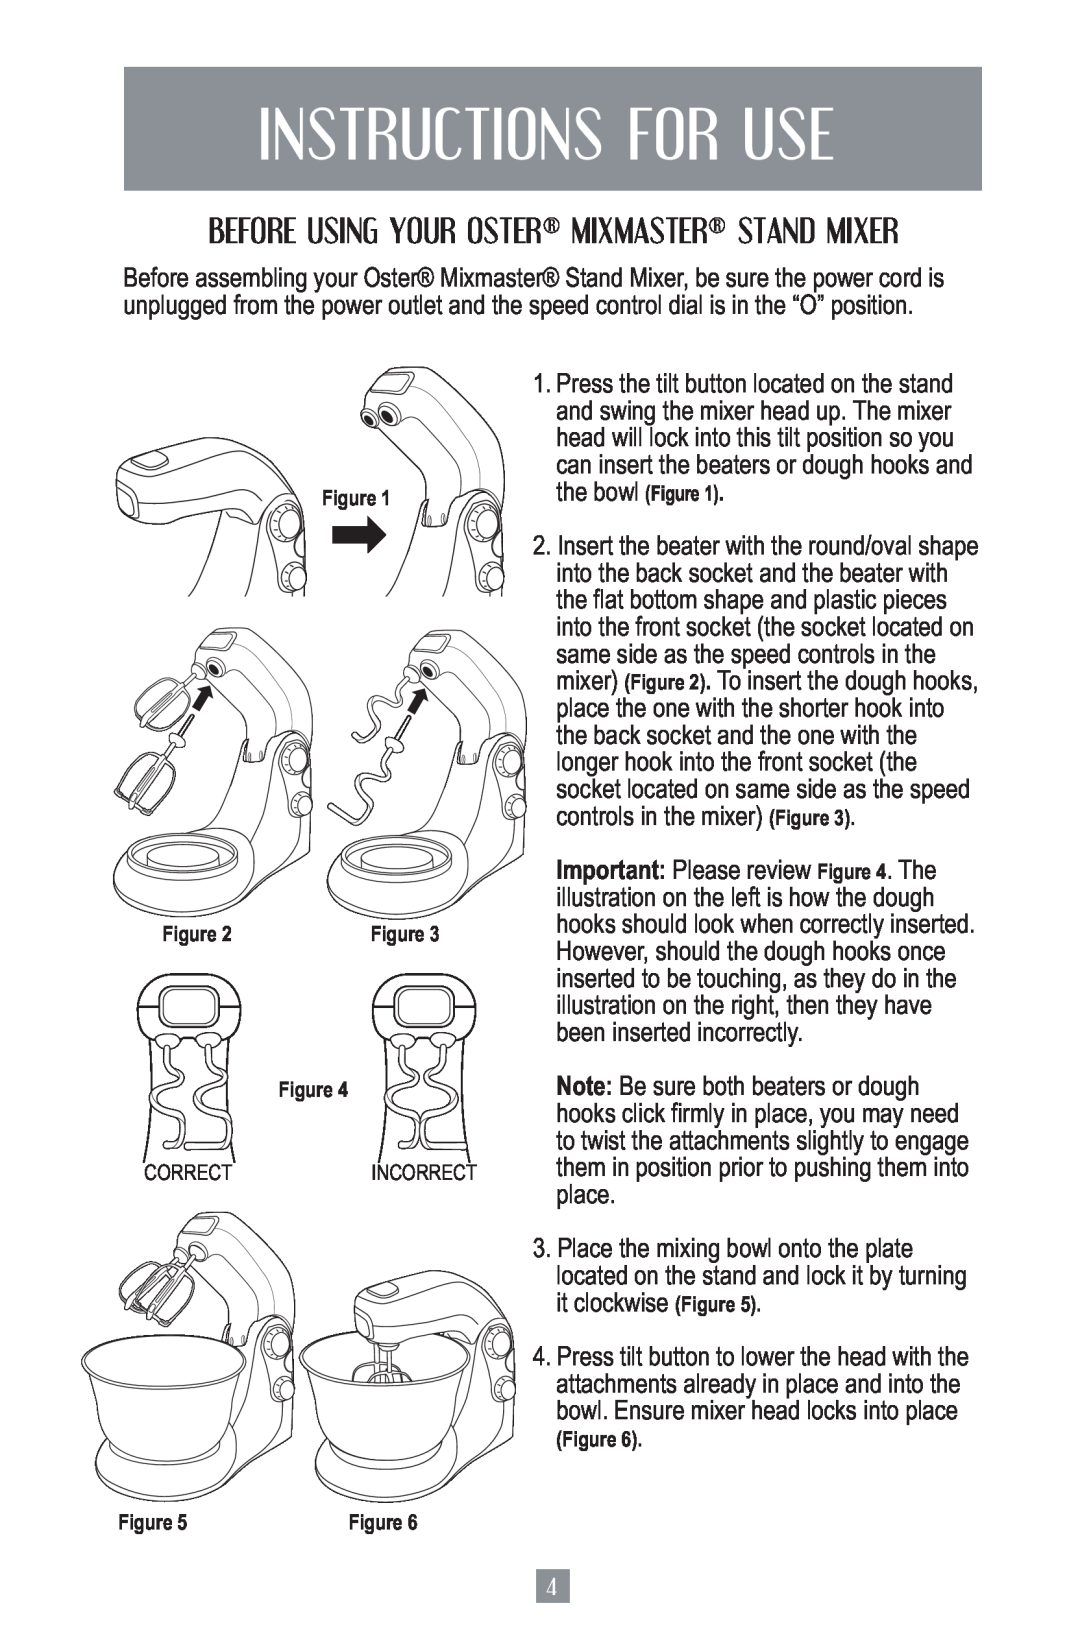 Oster 2700 instruction manual Instructions For Use, Before Using Your Oster Mixmaster Stand Mixer 